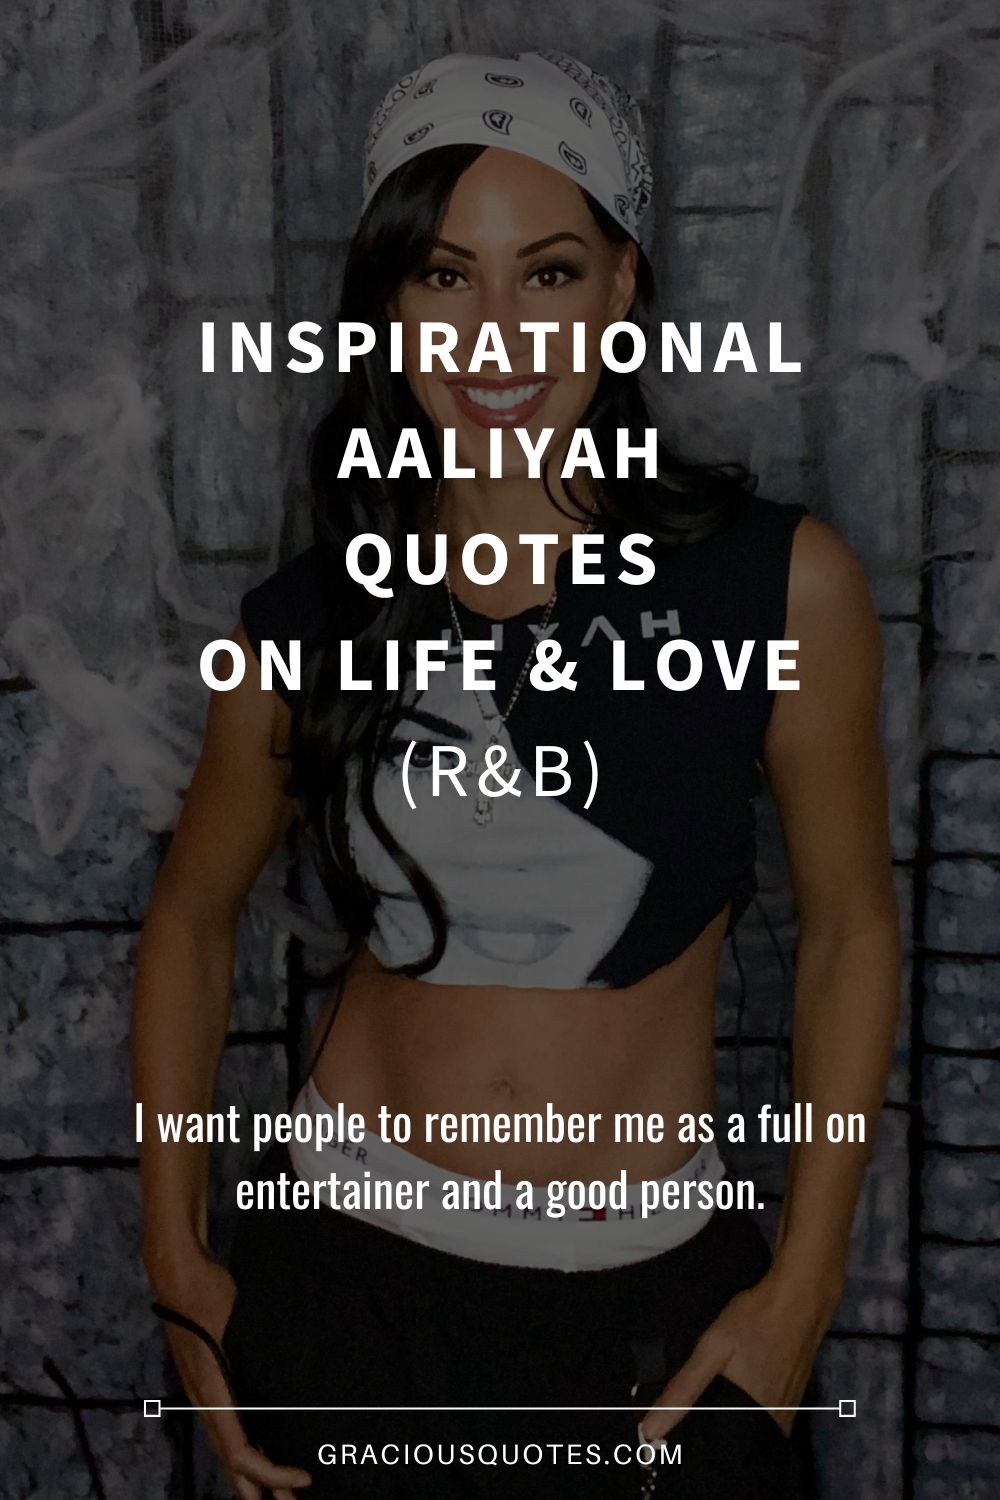 Inspirational Aaliyah Quotes on Life & Love (R&B) - Gracious Quotes